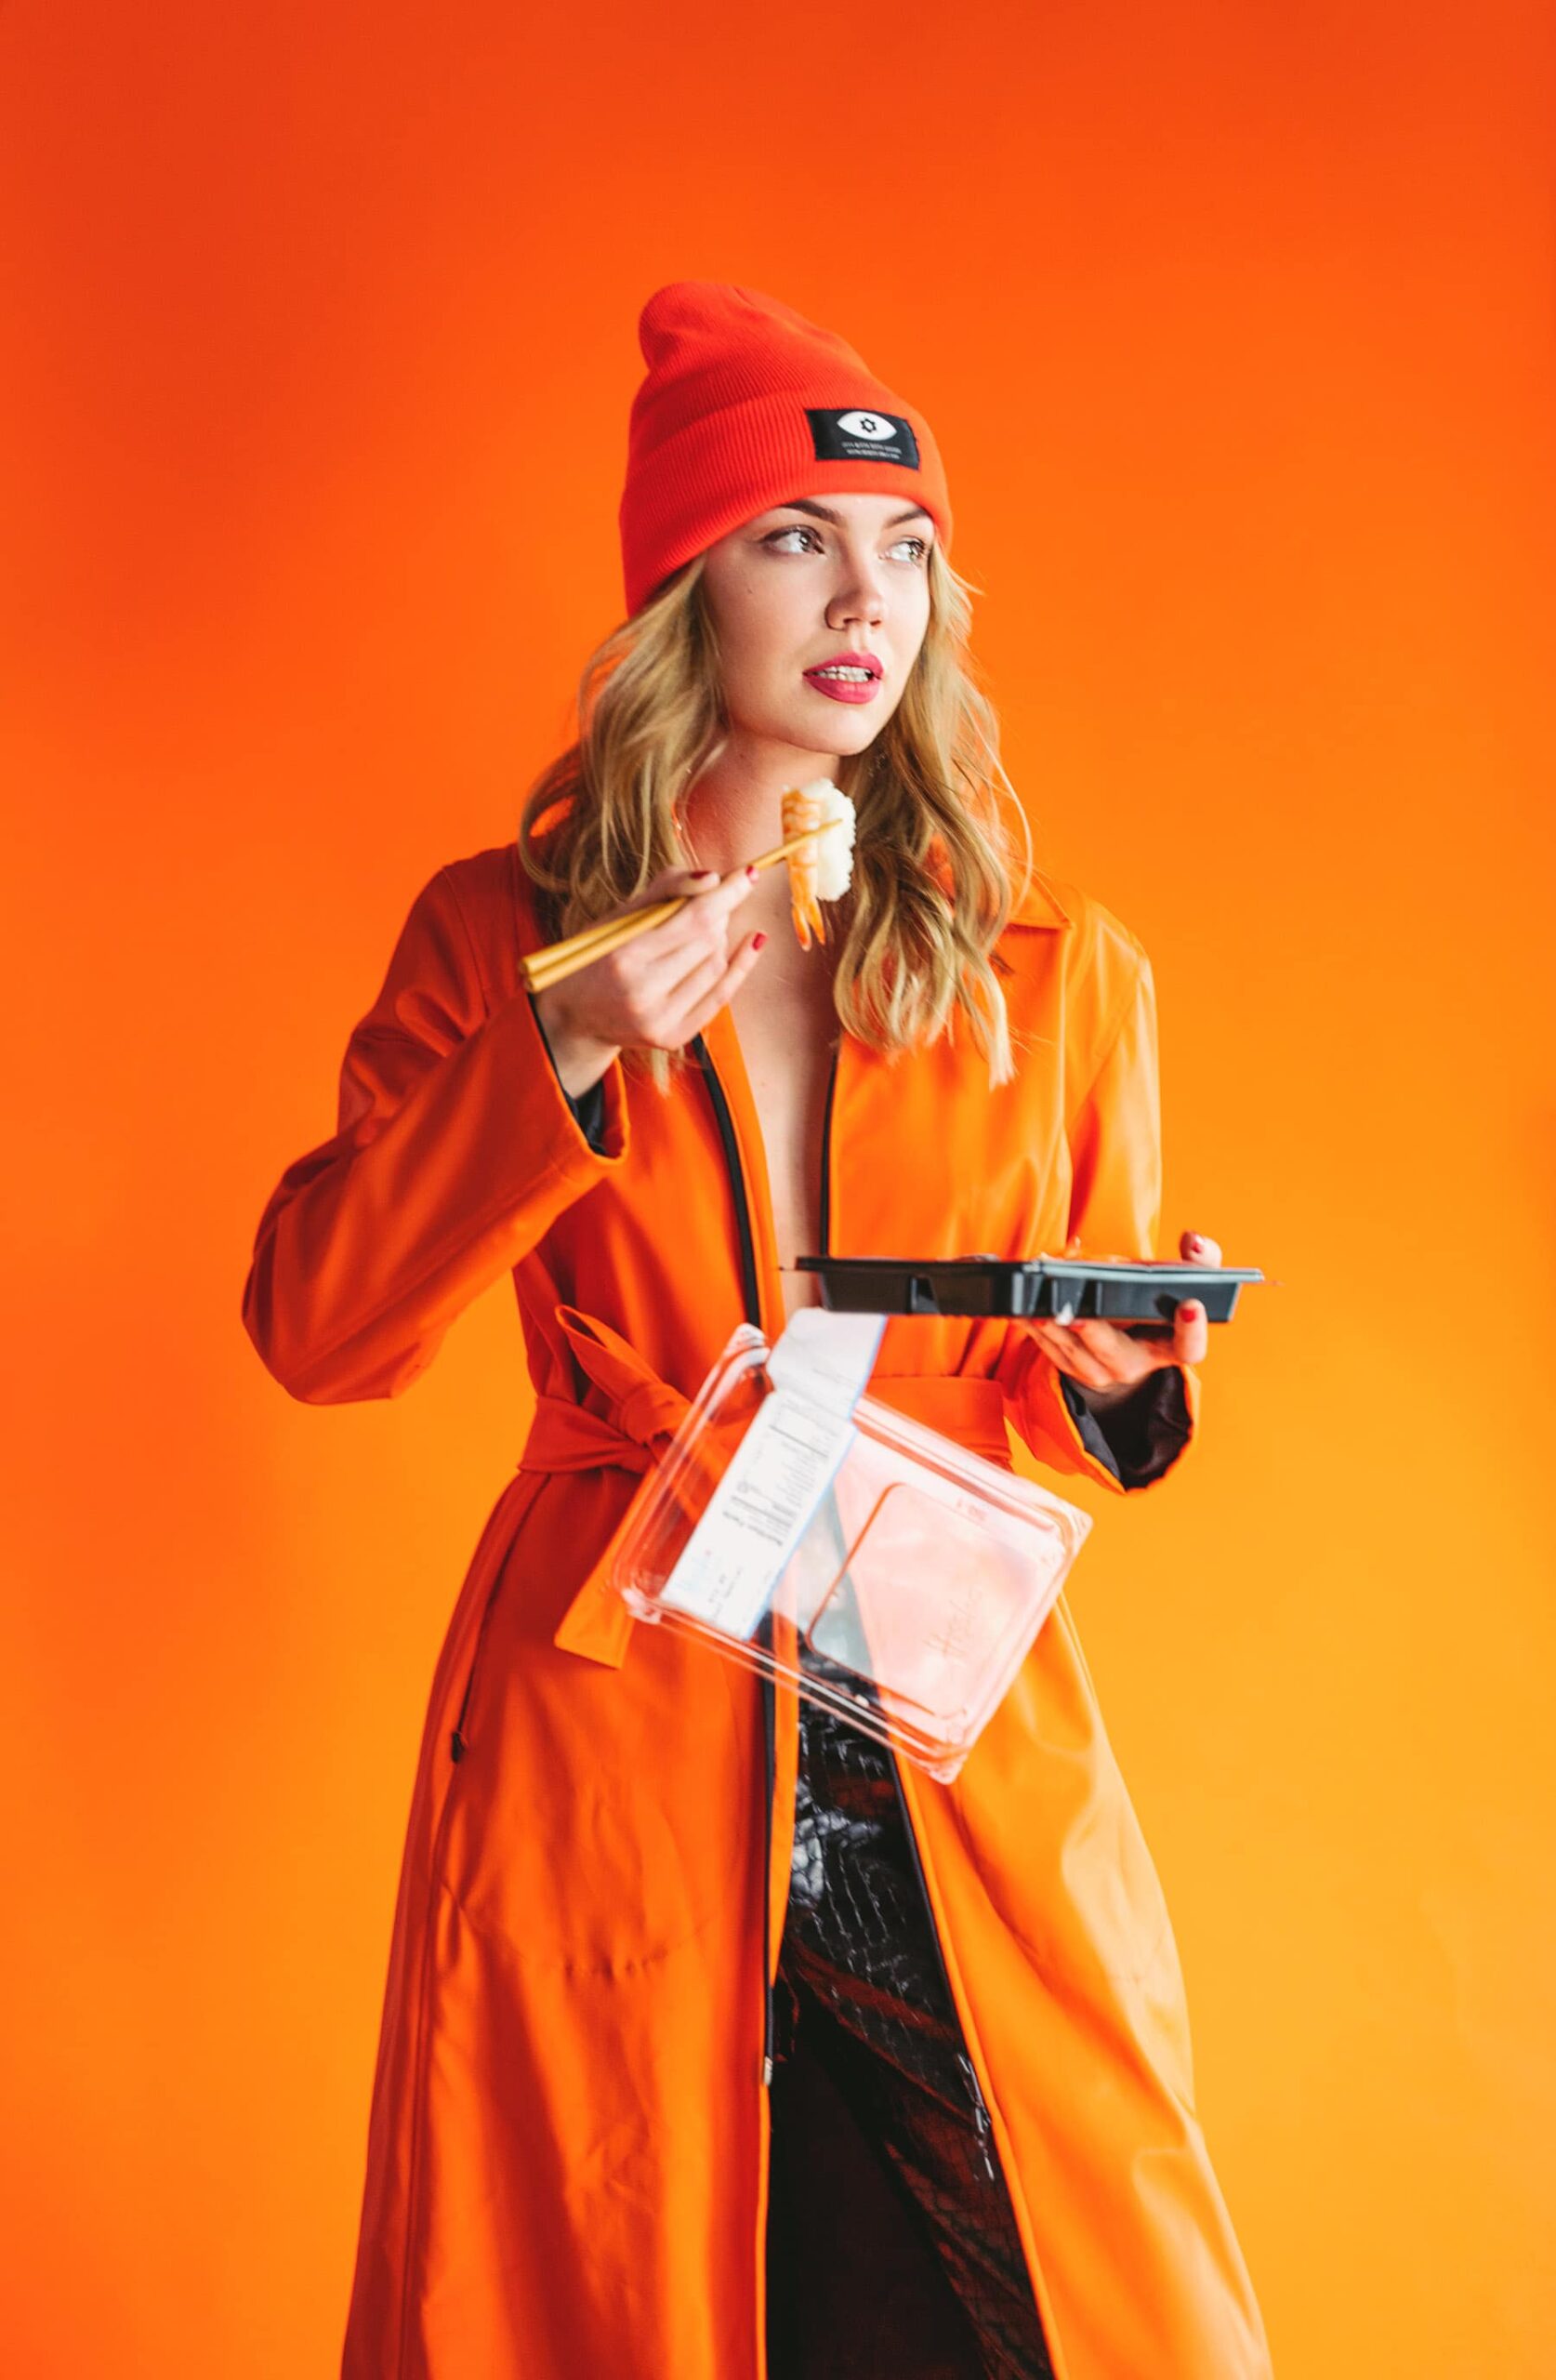 Photograph of a woman in orange coat with container